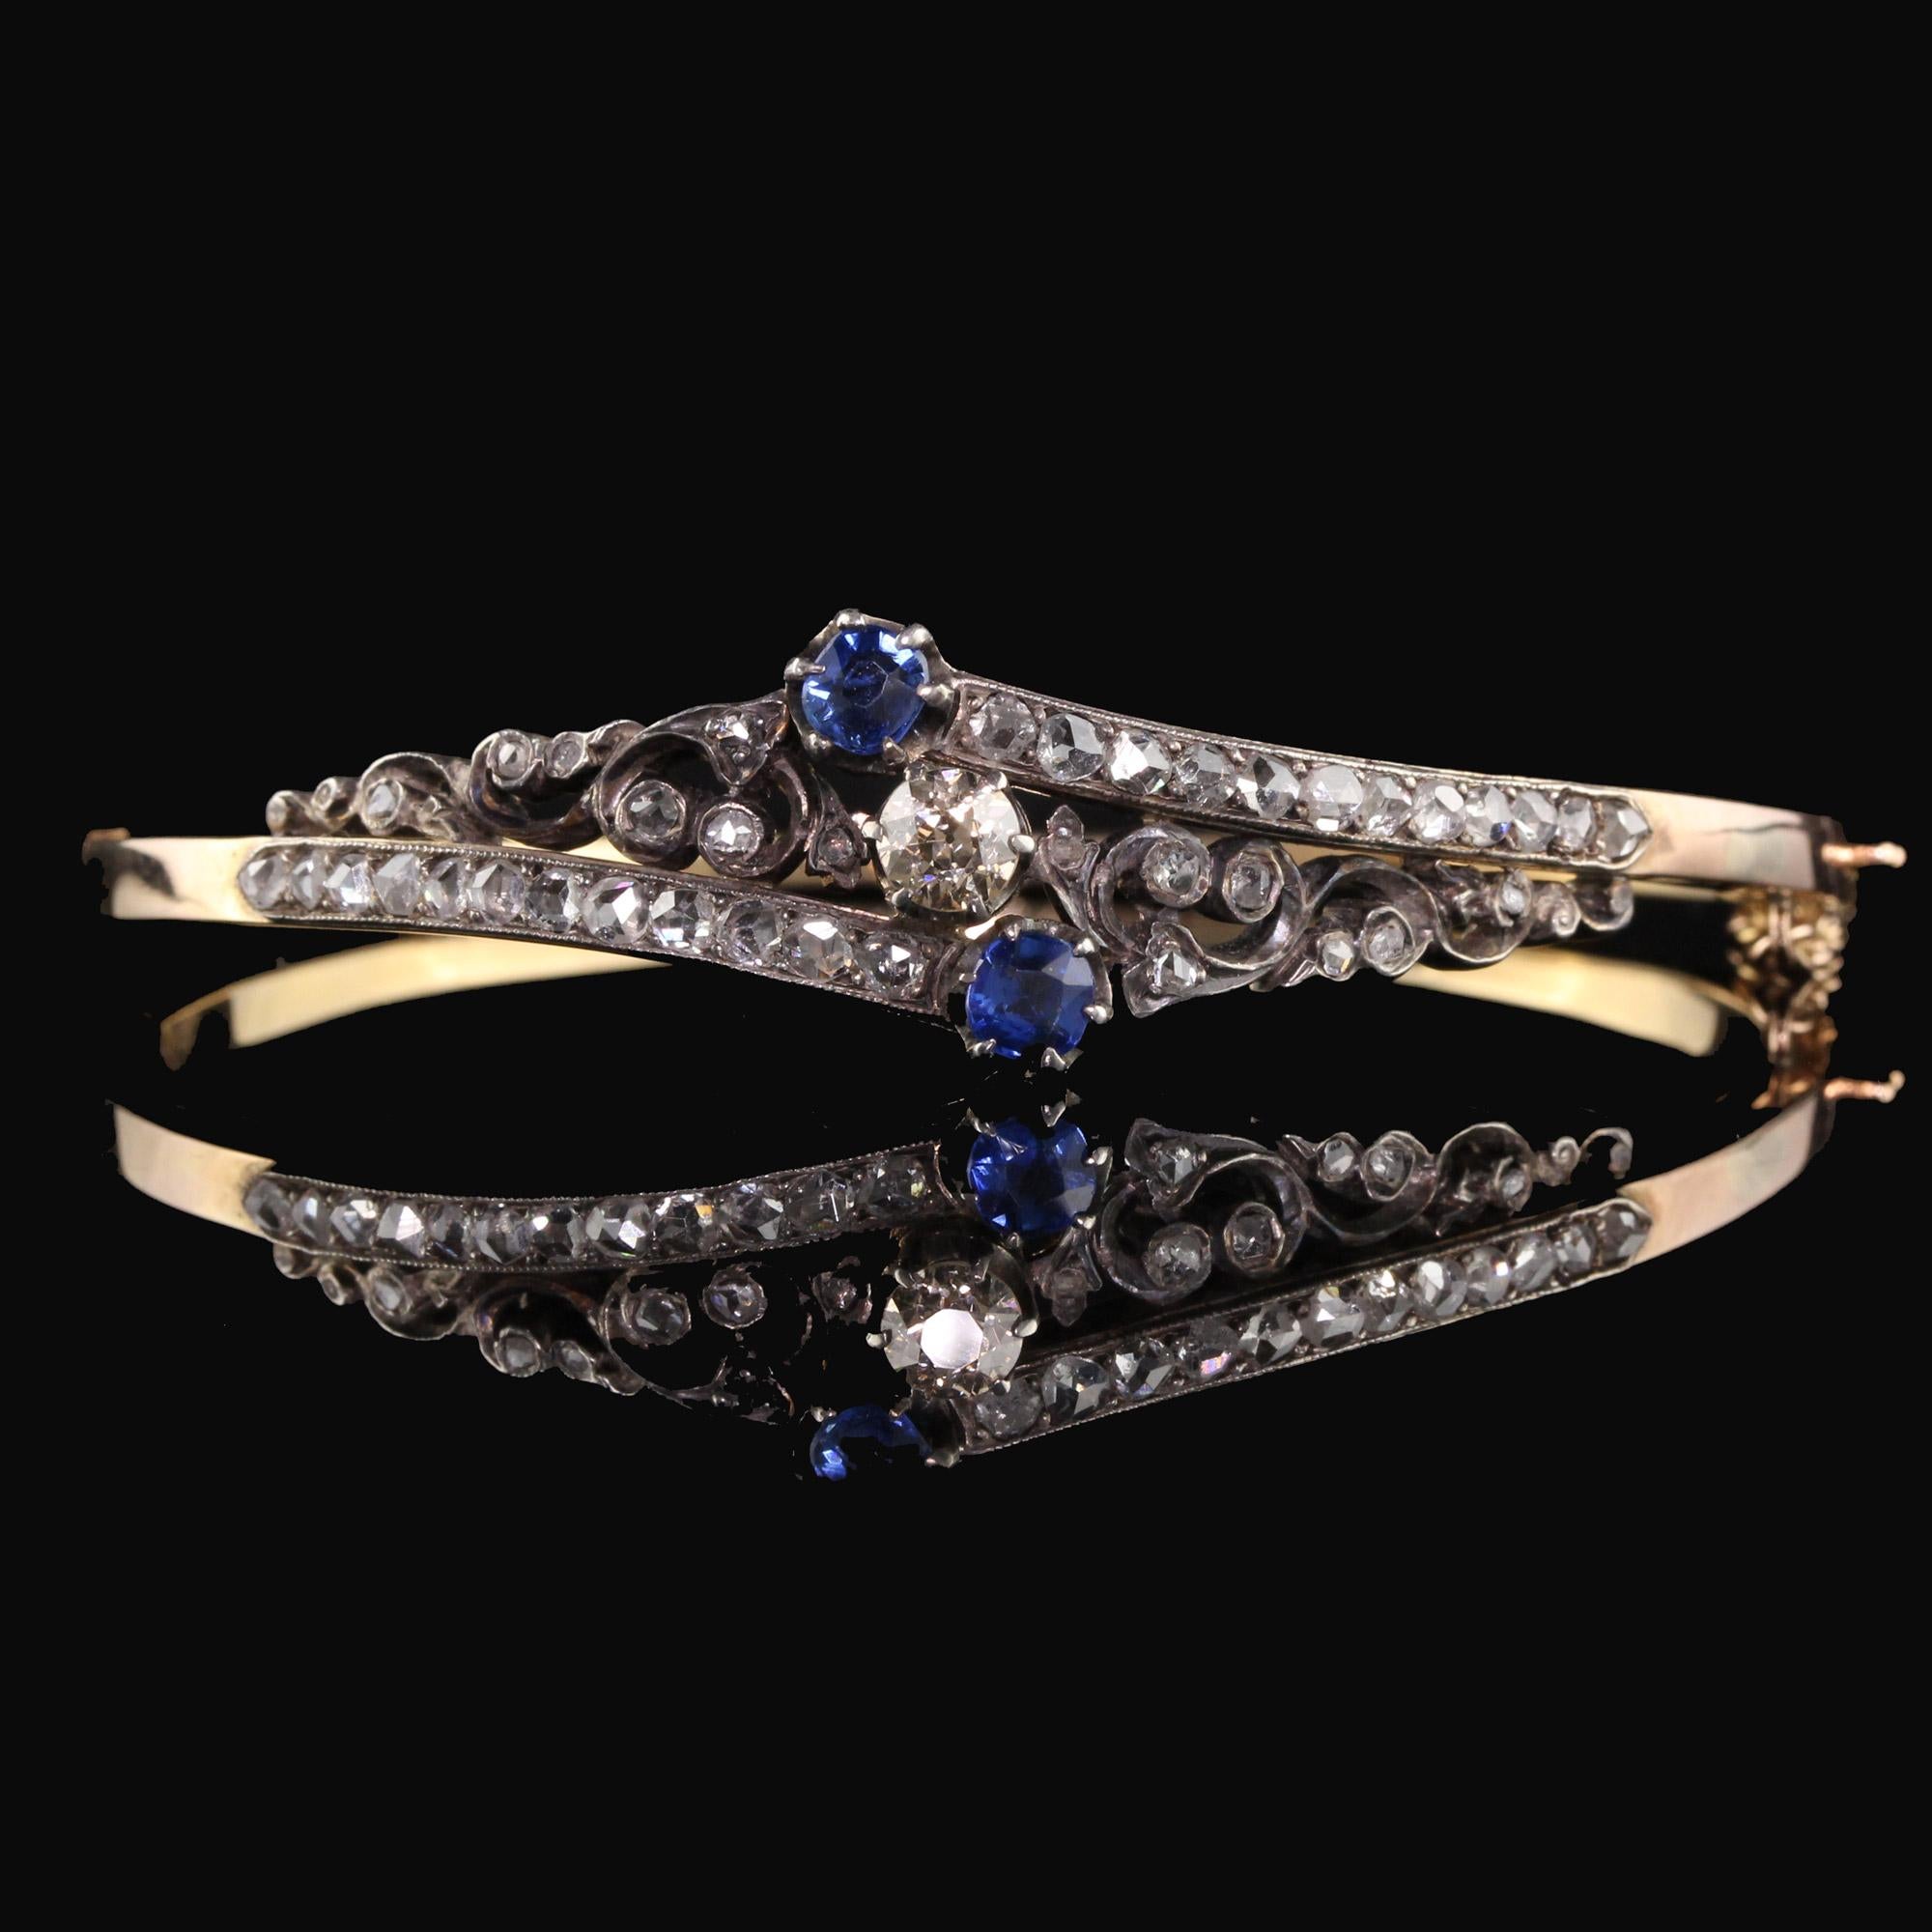 Antique Victorian 14K Yellow Gold Rose Cut Diamond and Sapphire Bangle Bracelet For Sale 1